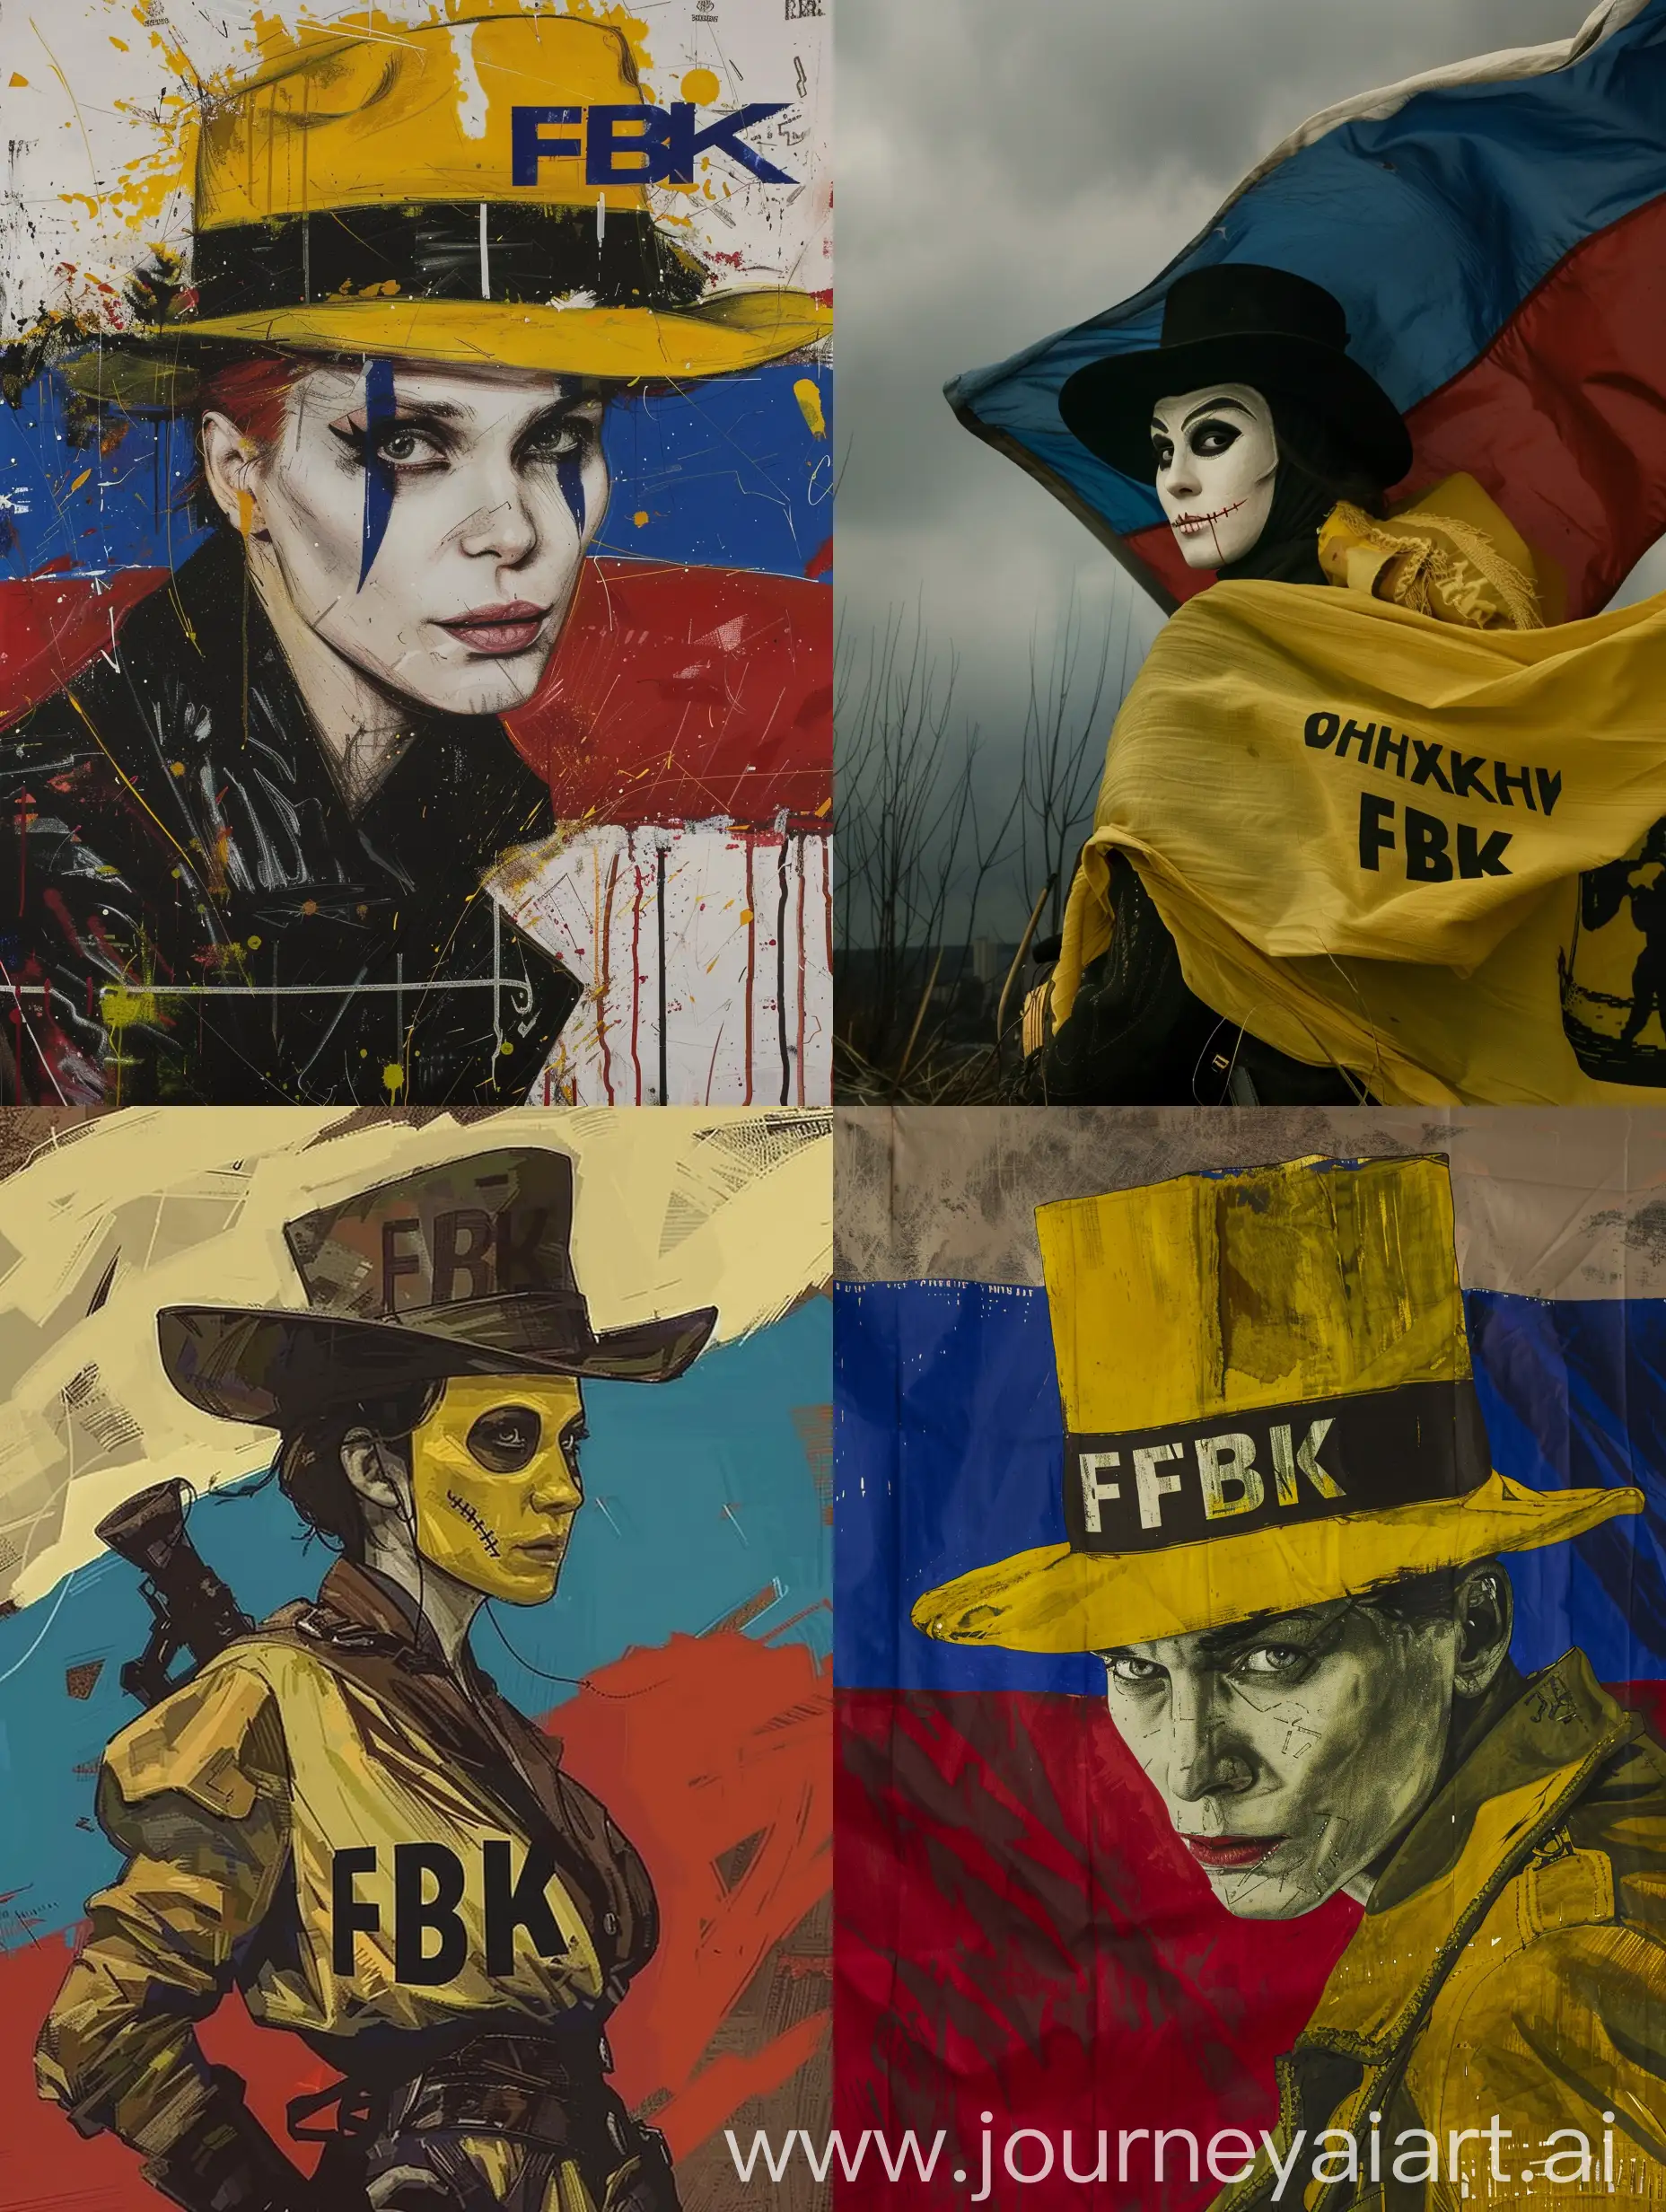 Maria Pevchikh in the image of Rorschack from the film Watchmen under the flag of the Russian opposition with the inscription FBK